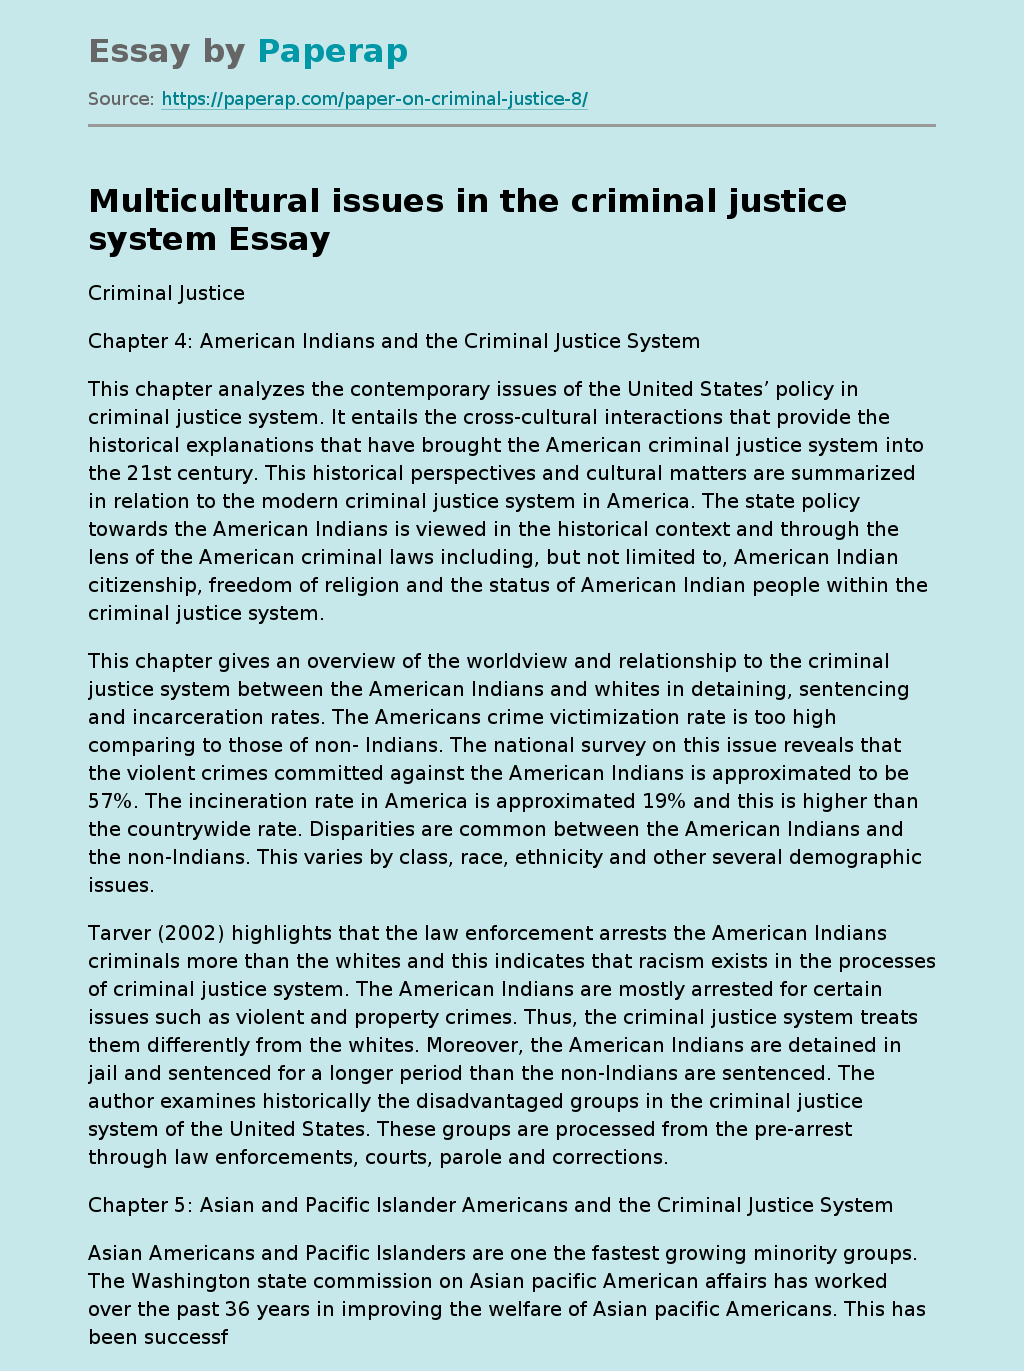 Multicultural issues in the criminal justice system